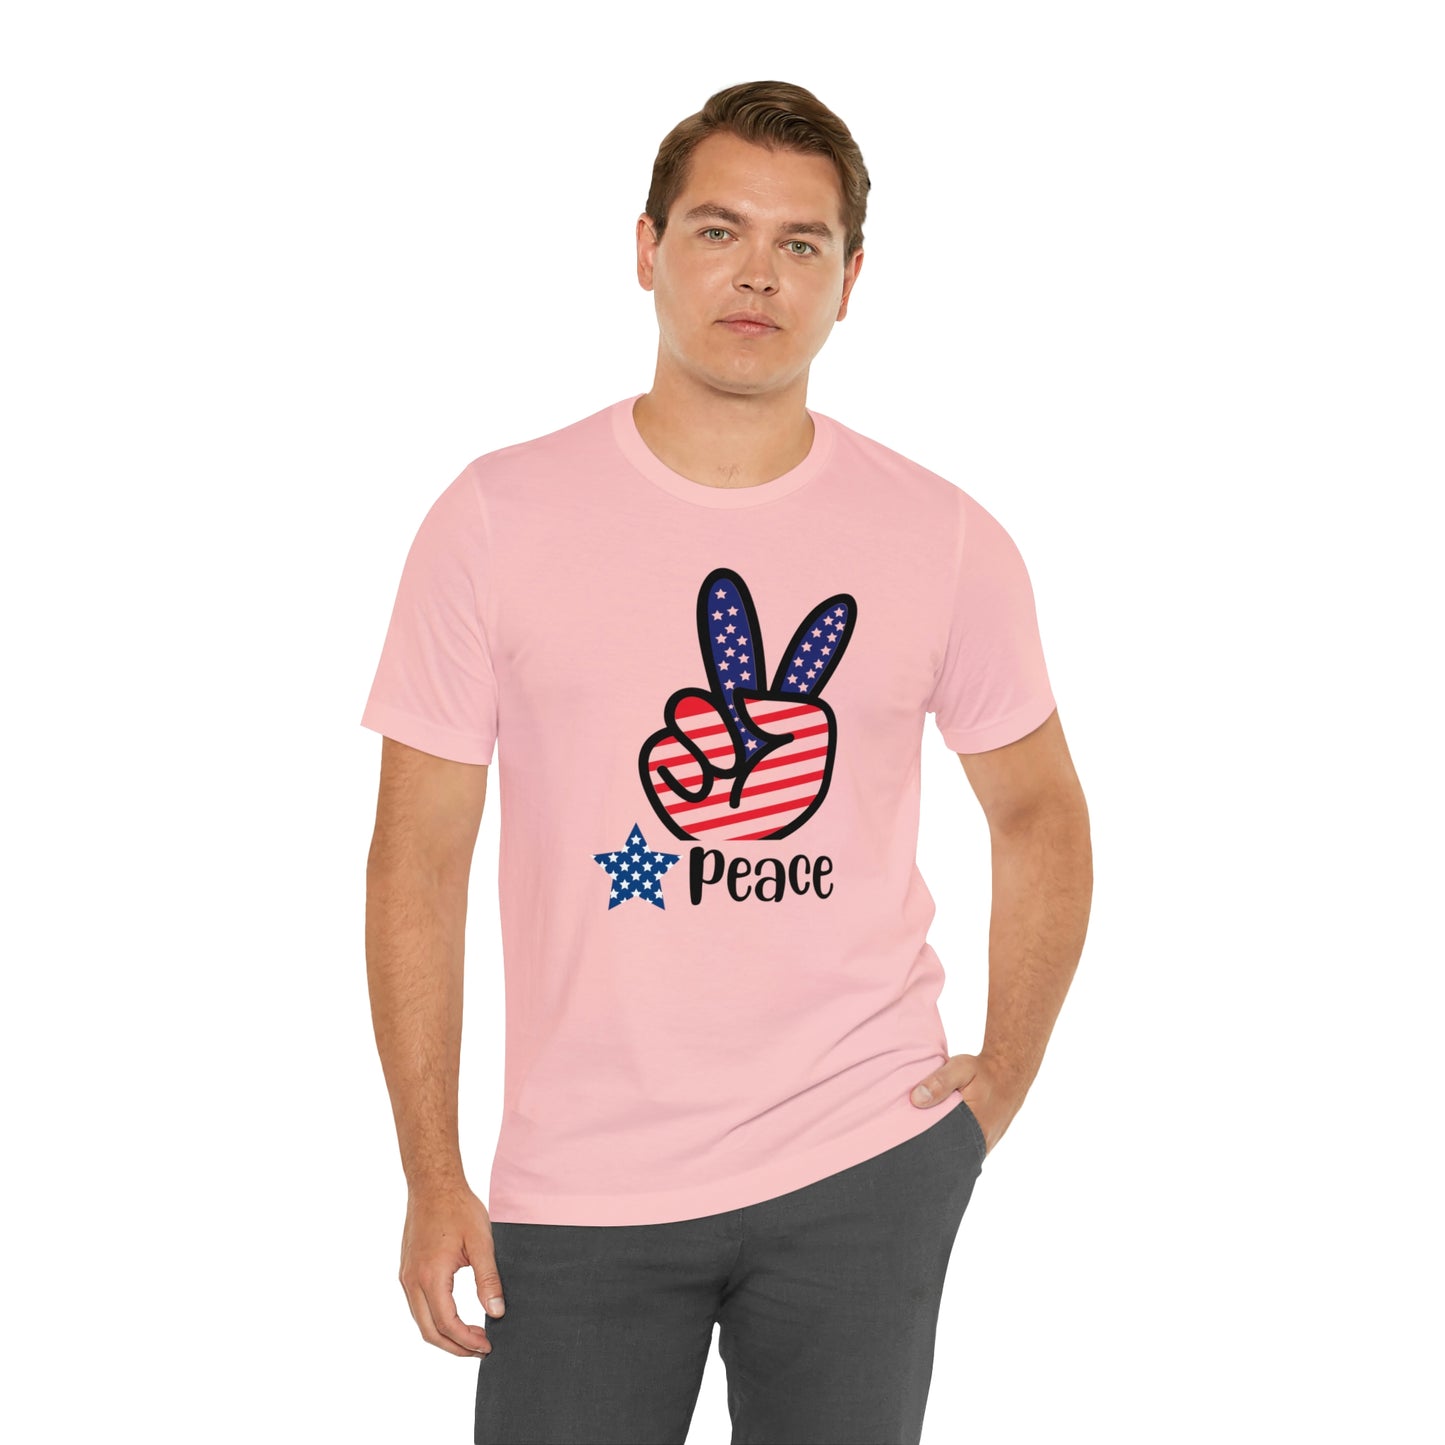 Memorial Day shirt, Peace shirt, Independence Day, 4th of July shirt